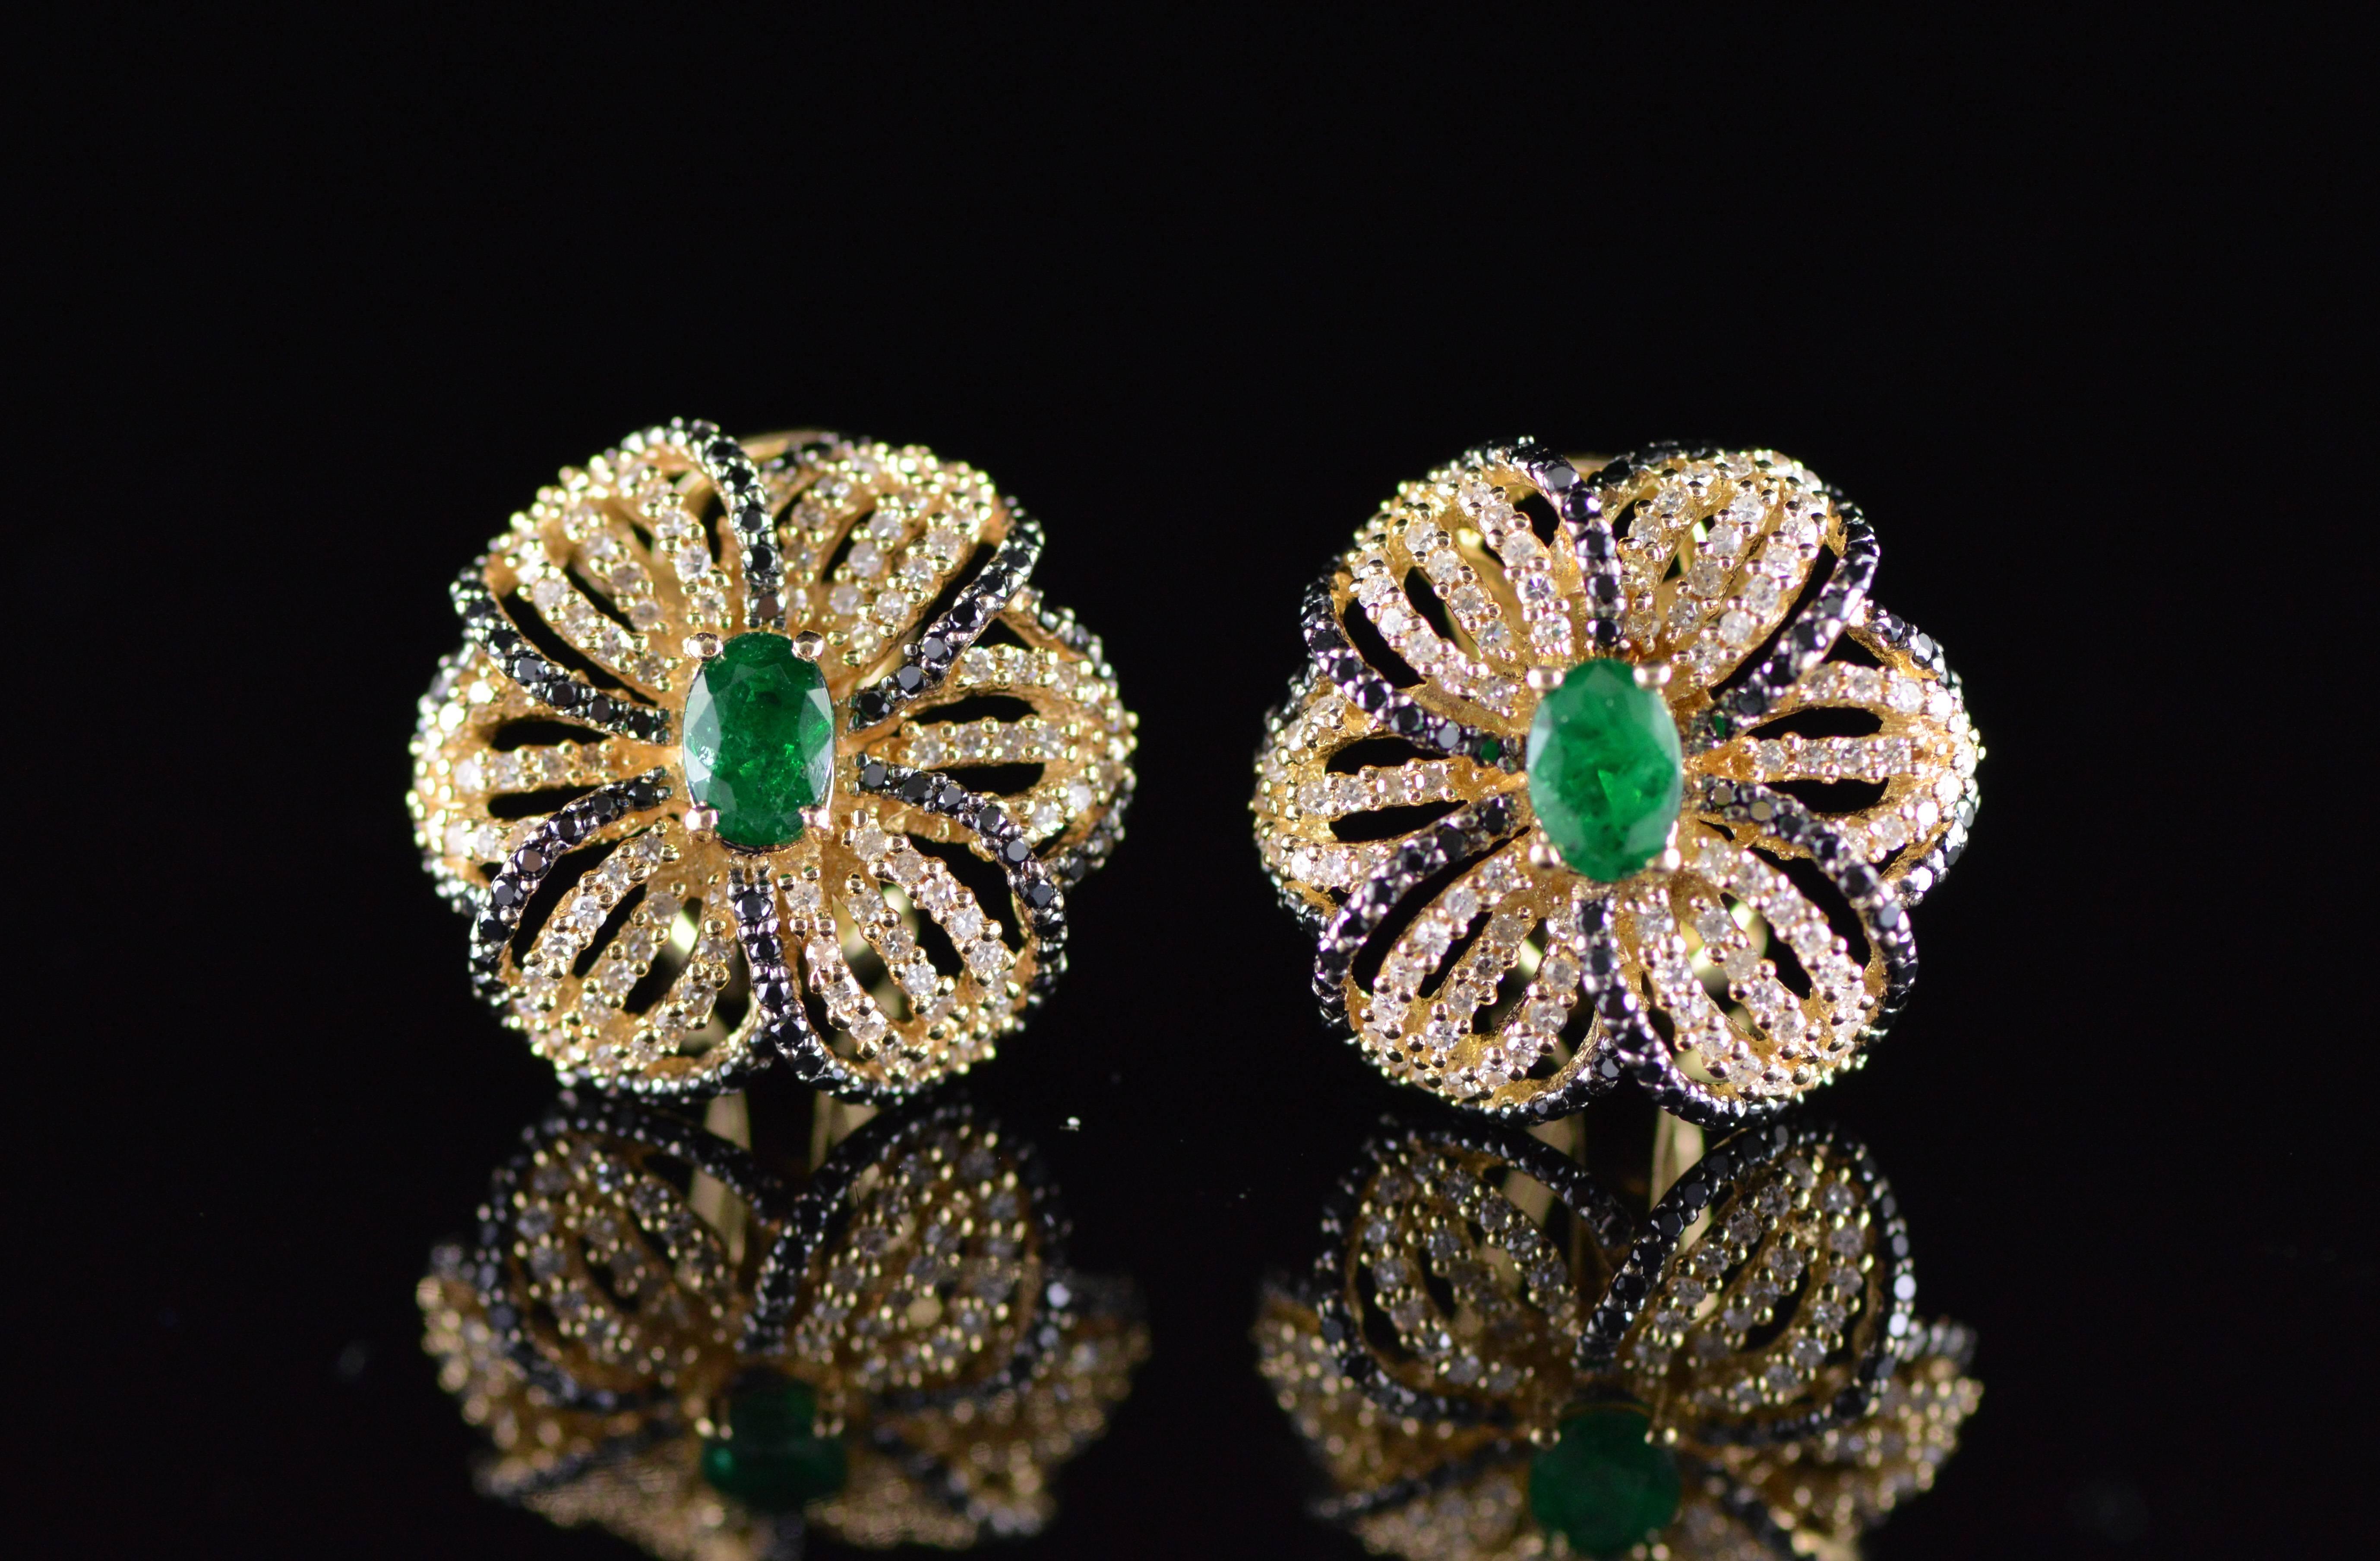 All diamonds are graded according to GIA grading standards.

·Item: 14K 3.07 CTW Emerald Black & White Diamond Flower French Clip Earrings Yellow Gold

·Era: Modern / 2000s

·Composition: 14k Gold Marked/Tested

·Gem Stone: 2x